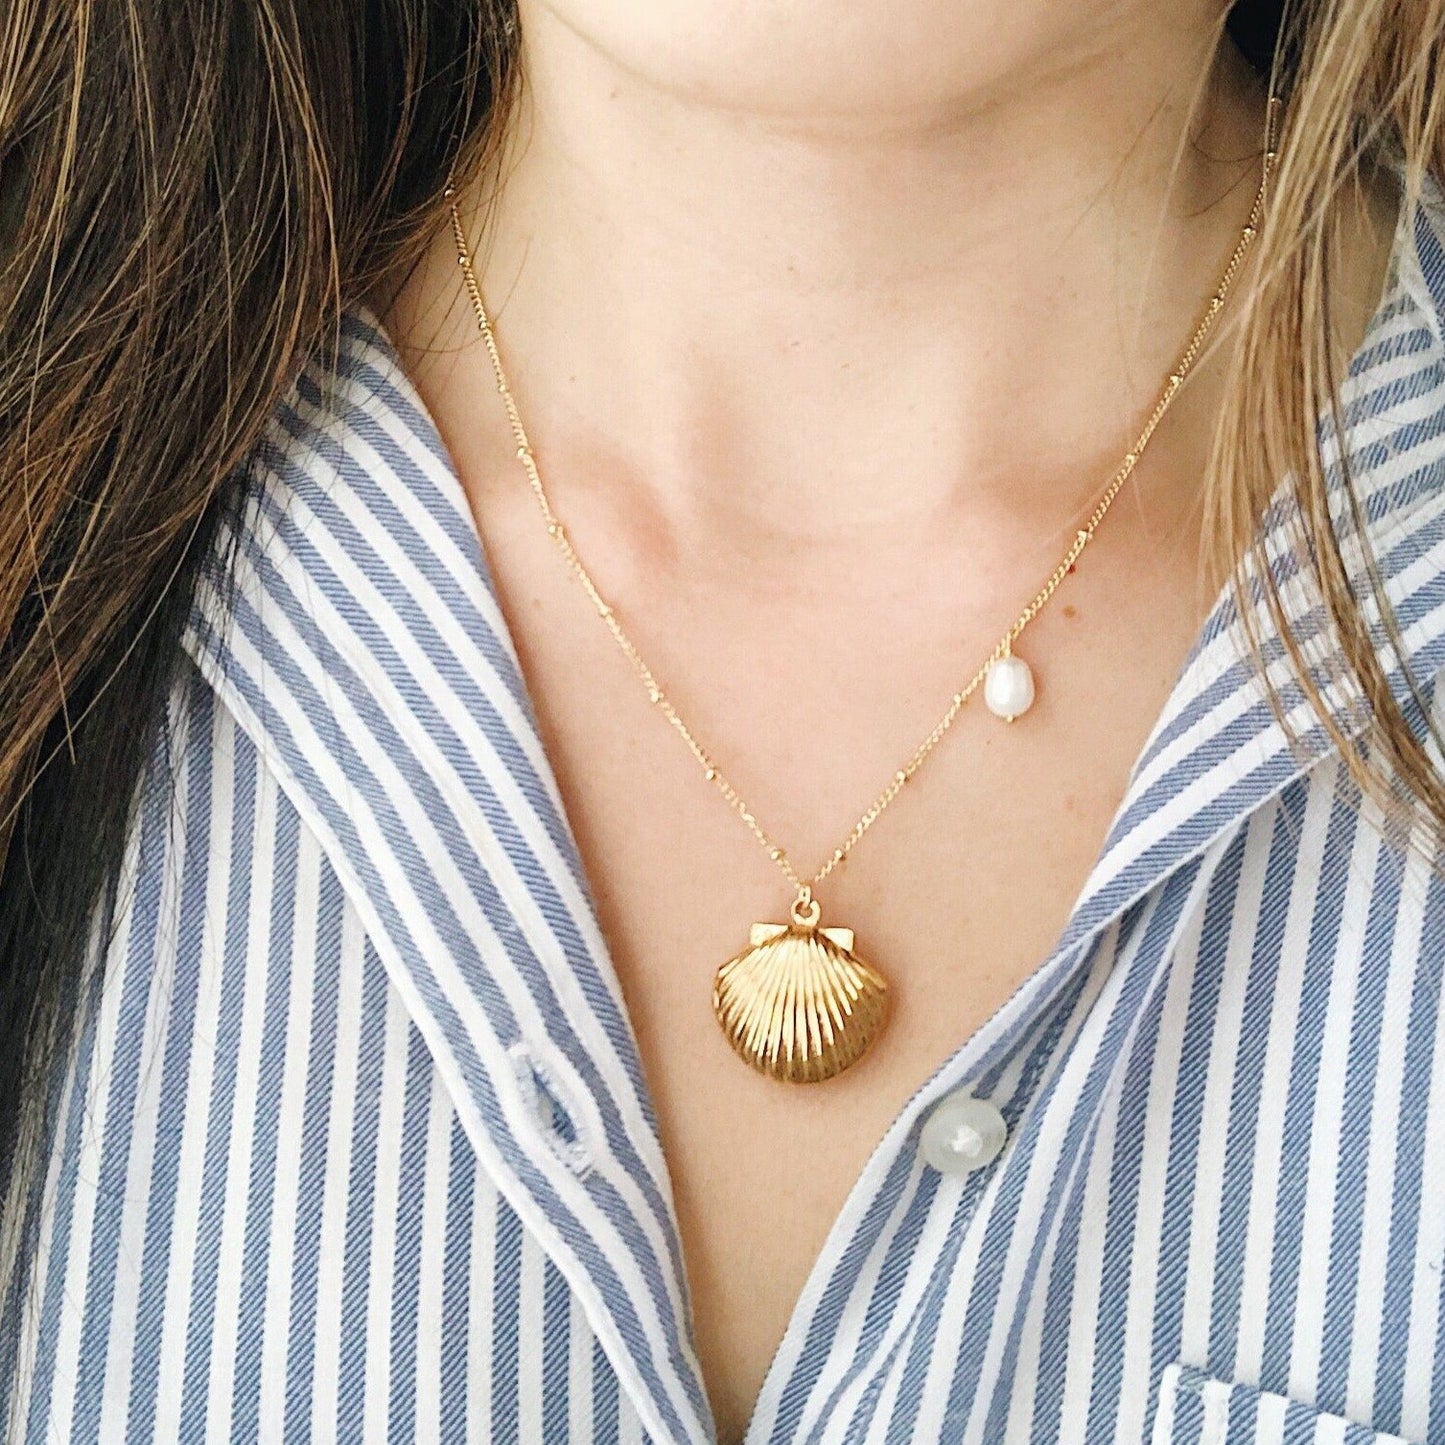 Gold Clam Shell Locket Necklace